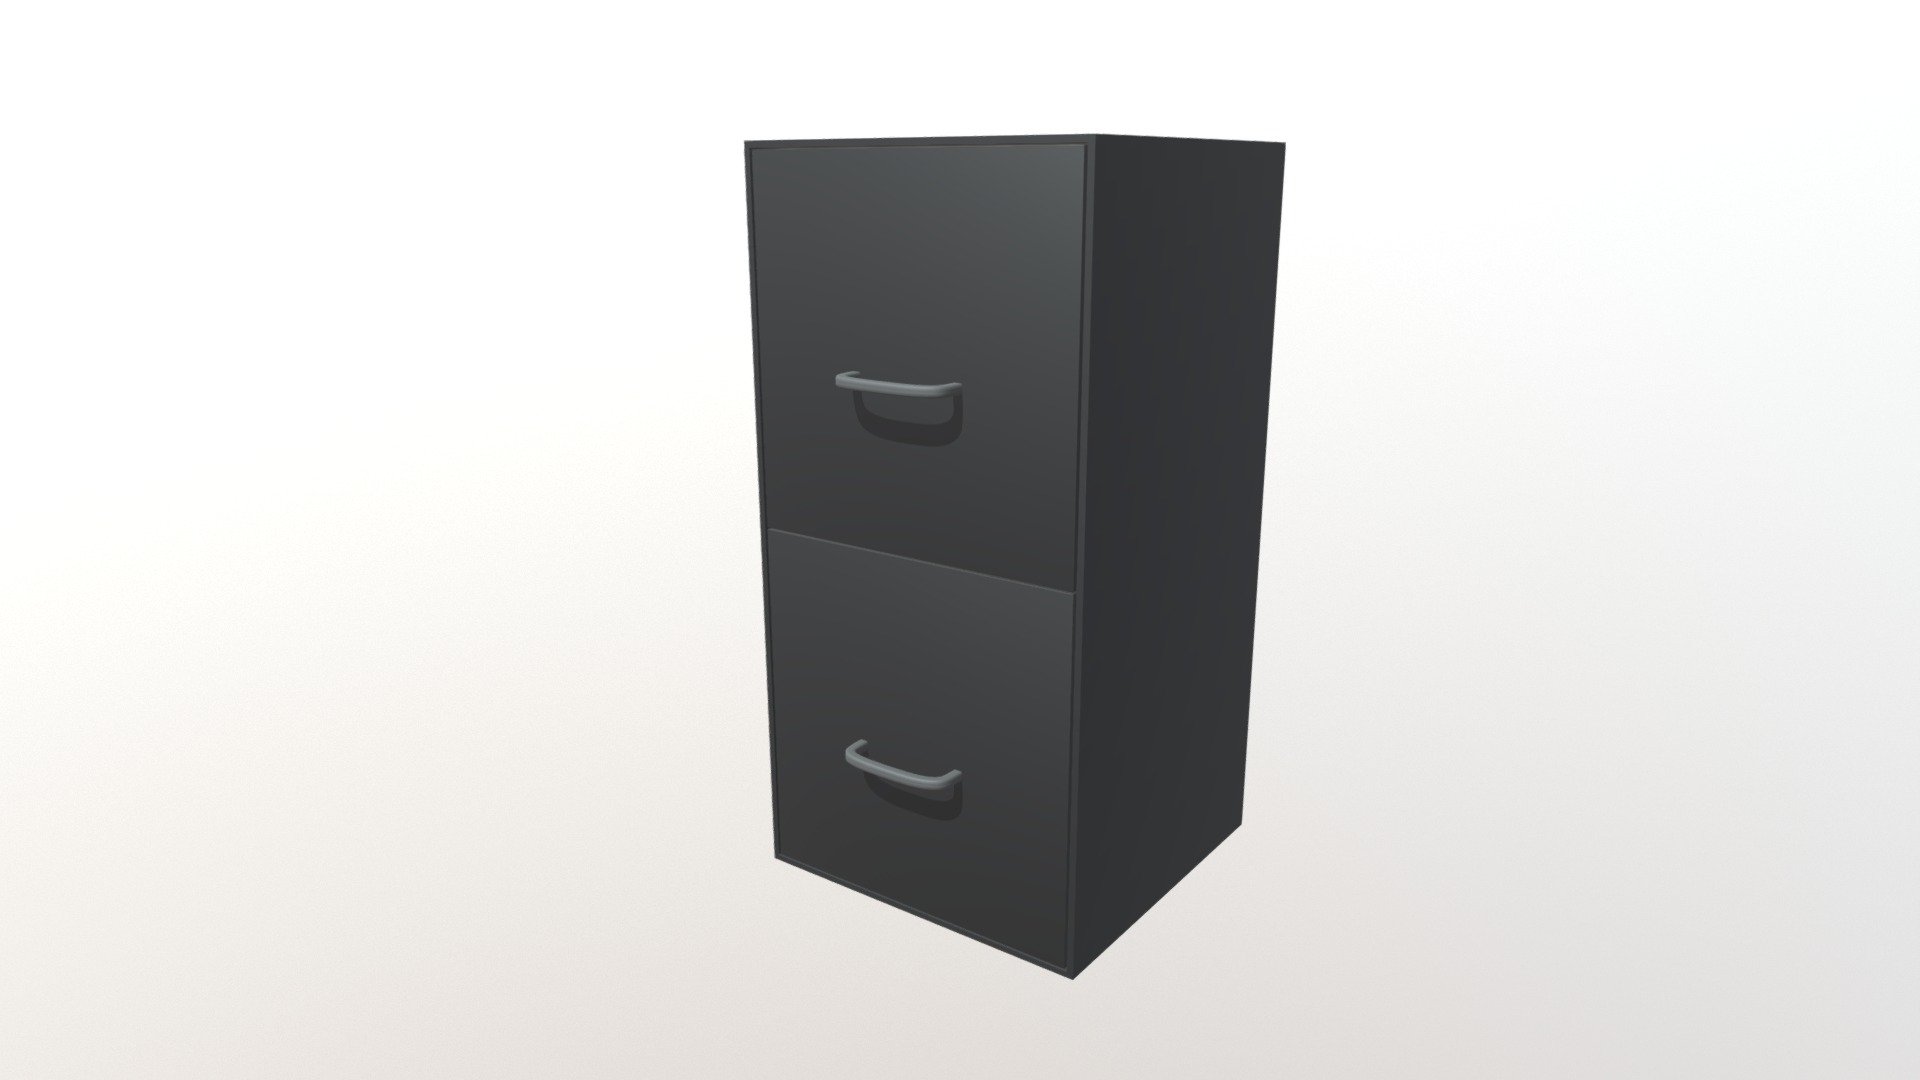 Vertical Style Filing Cabinet